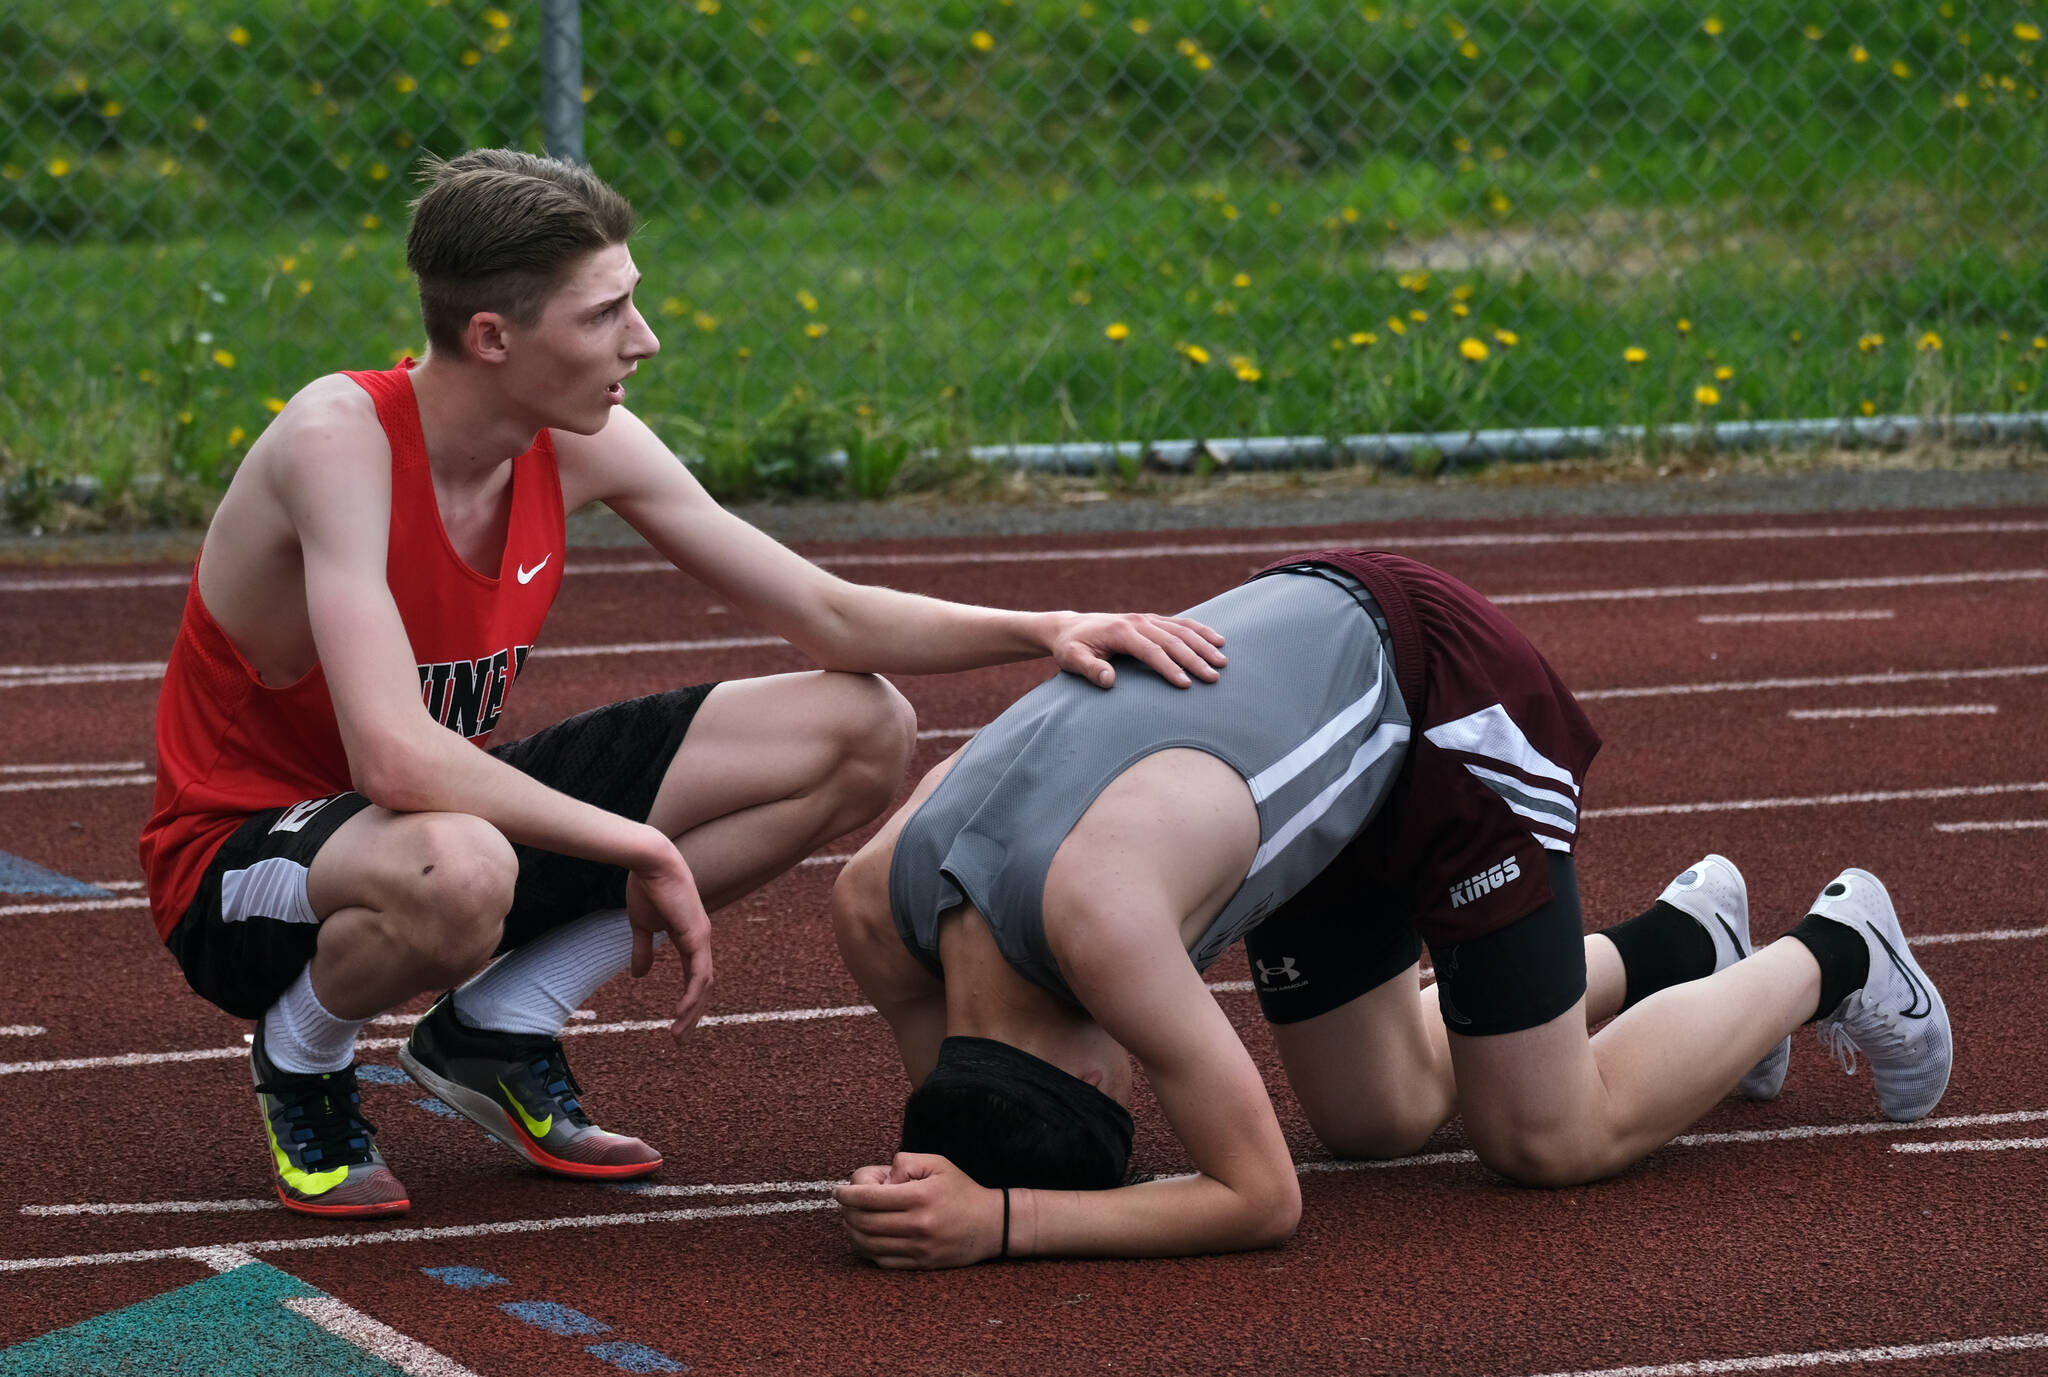 JDHS sophomore Joshua Reed supports Ketchikan freshman Carter Phillips at the finish of the combined DI/DII 3200 meters during the Region V Track & Field Championships, Friday, at Thunder Mountain. The championships resume Saturday. (Klas Stolpe / Juneau Empire)